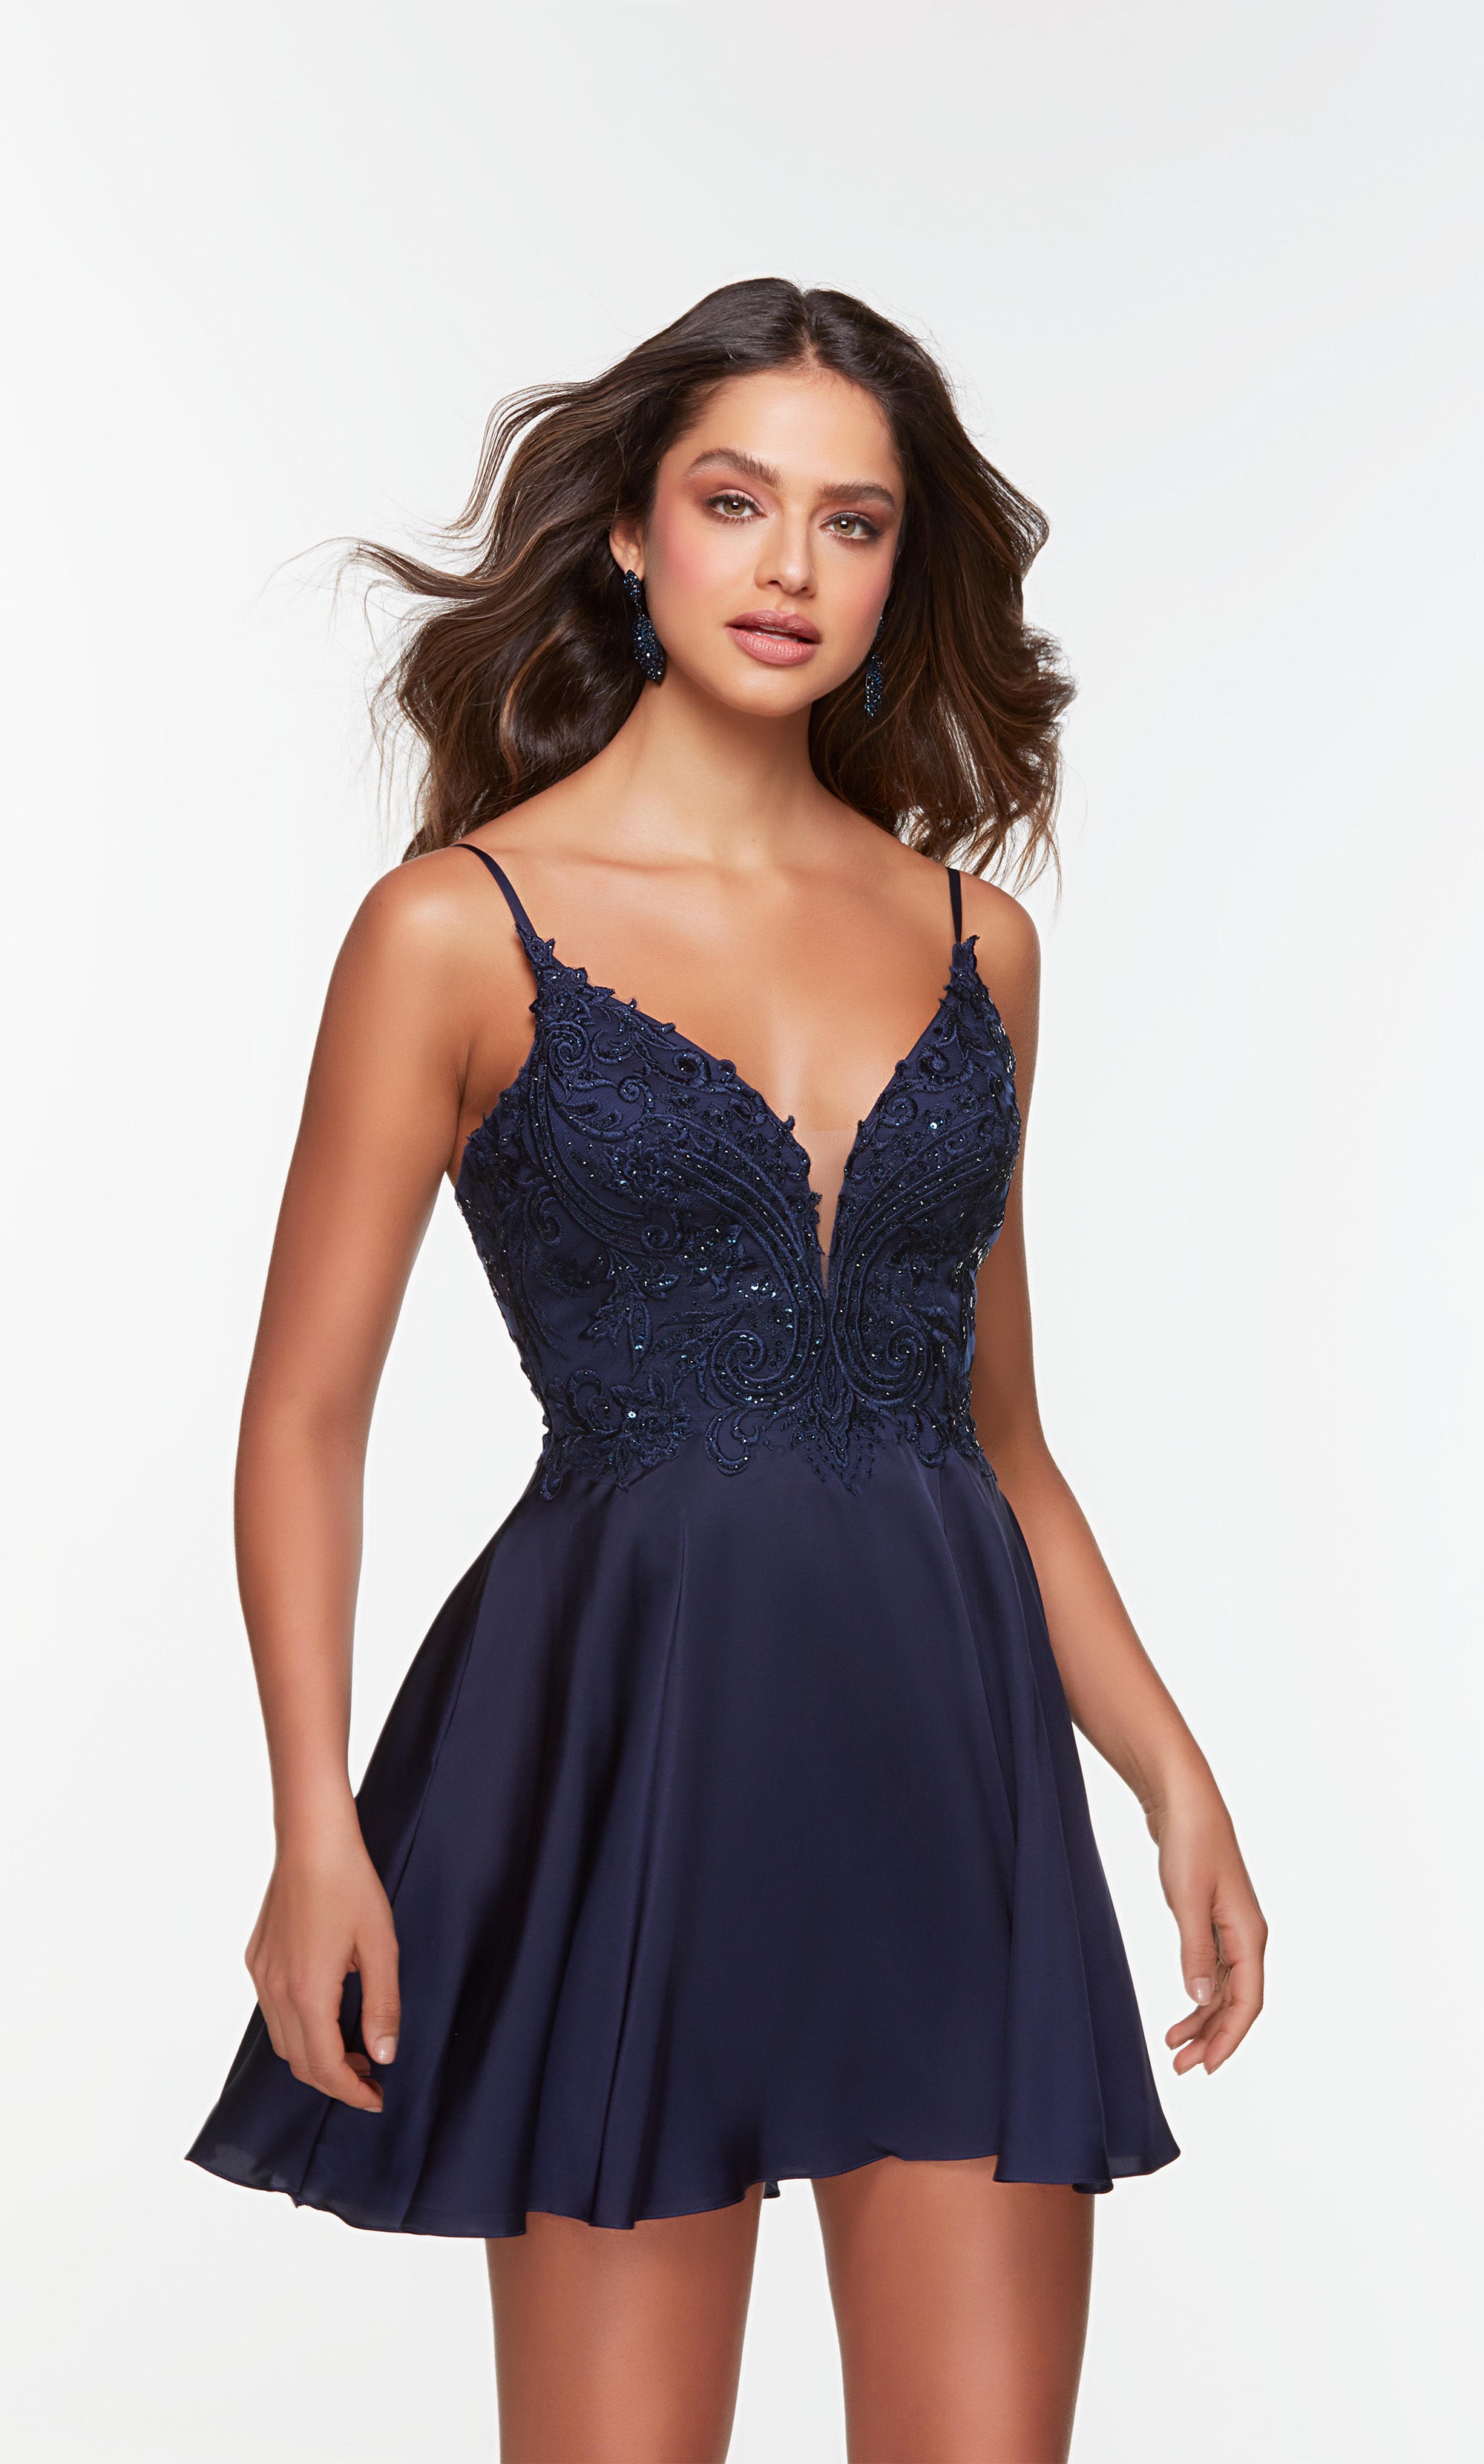 Embroidered-Bodice Strapless Short Party Dress